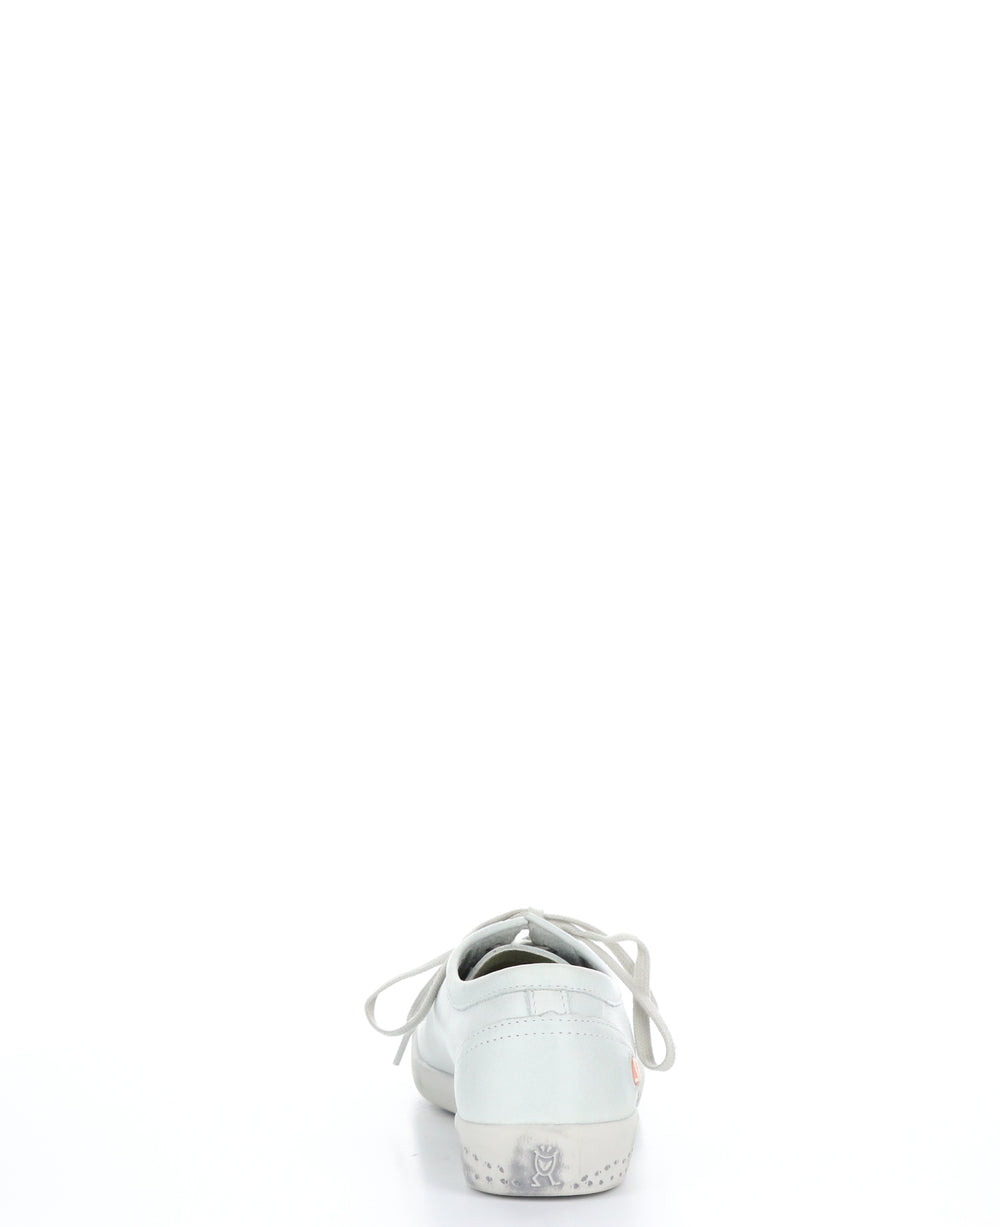 ISLA Smooth White Lace-up Trainers|ISLA Baskets à Lacets in Blanc